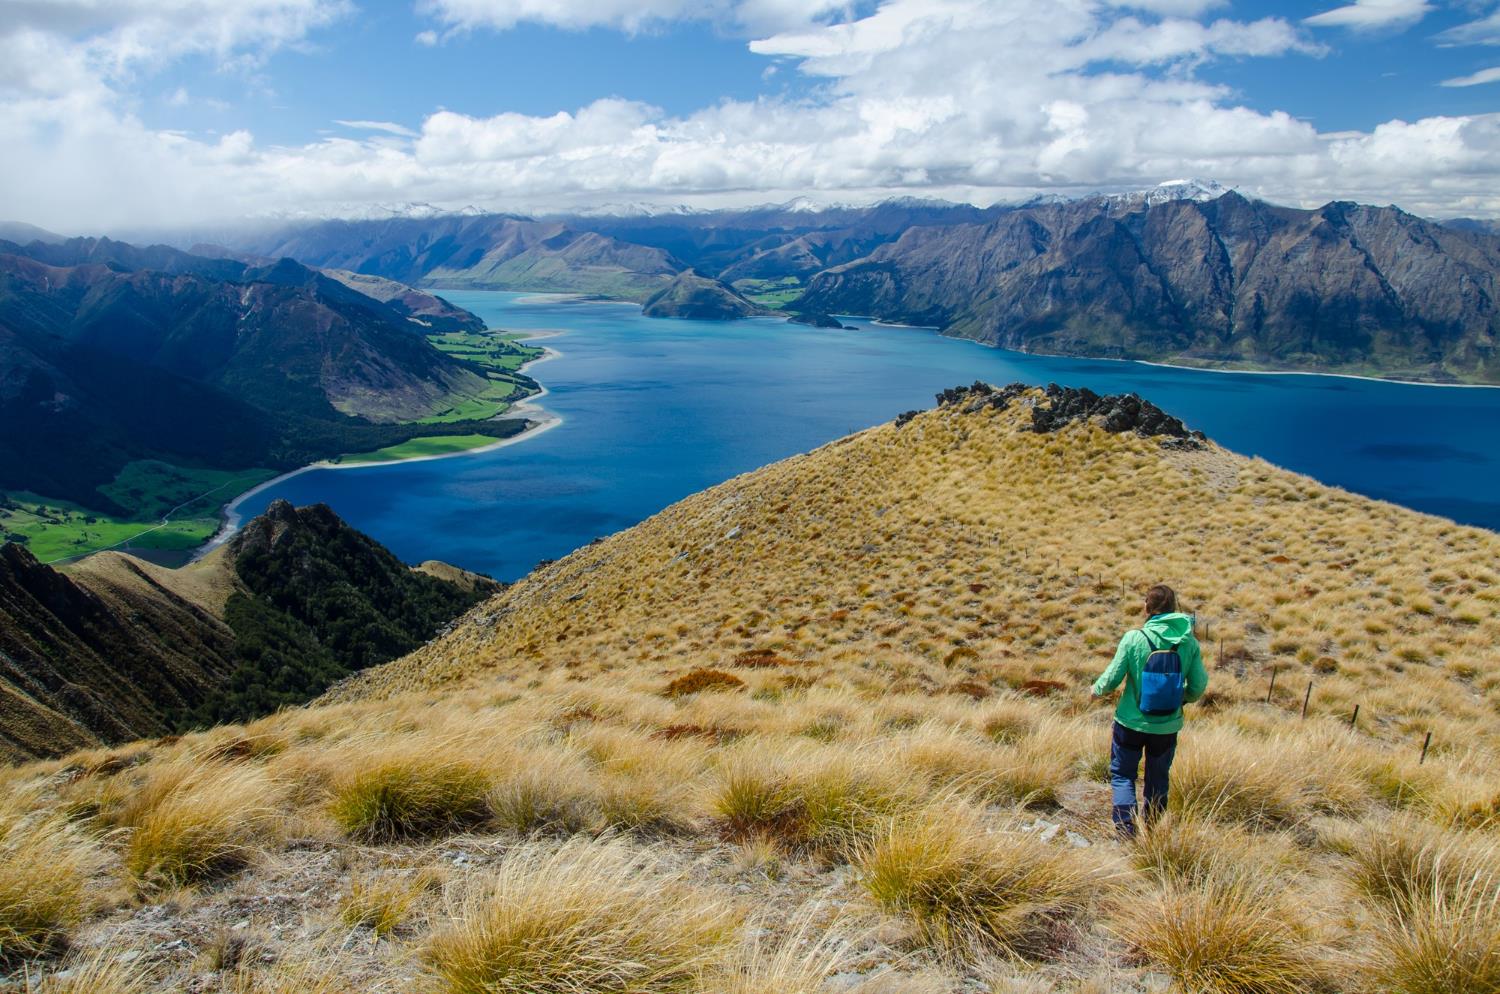 Closeup shot of a female walking at the isthmus peak and a lake in new zealand - Credit: Image by wirestockon Freepik